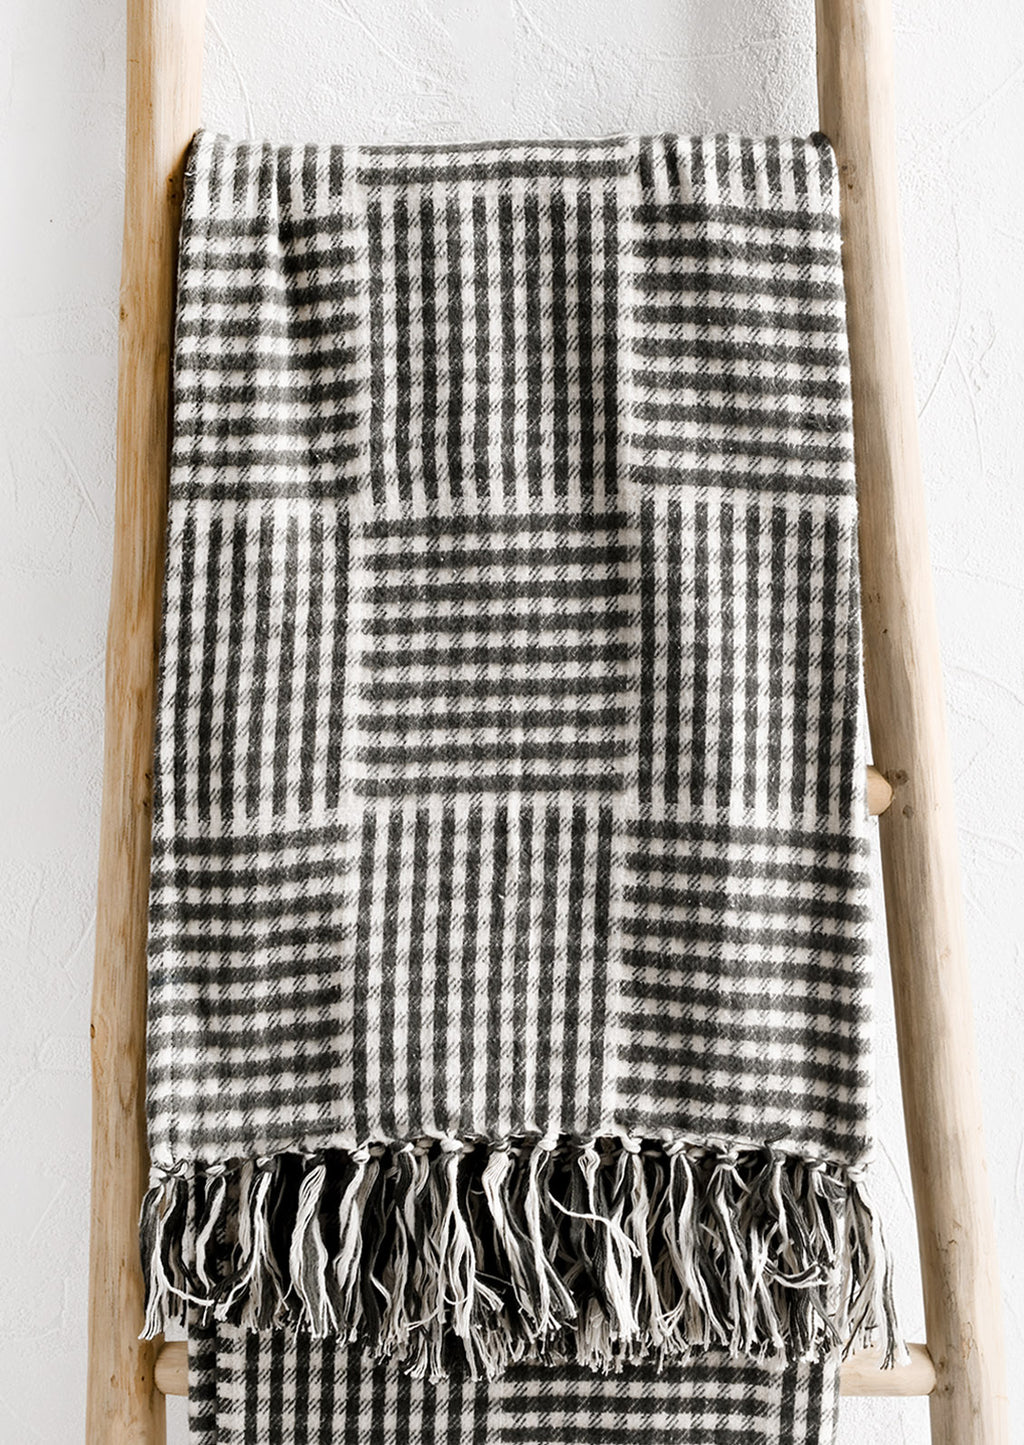 1: A black and white paneled check throw blanket.